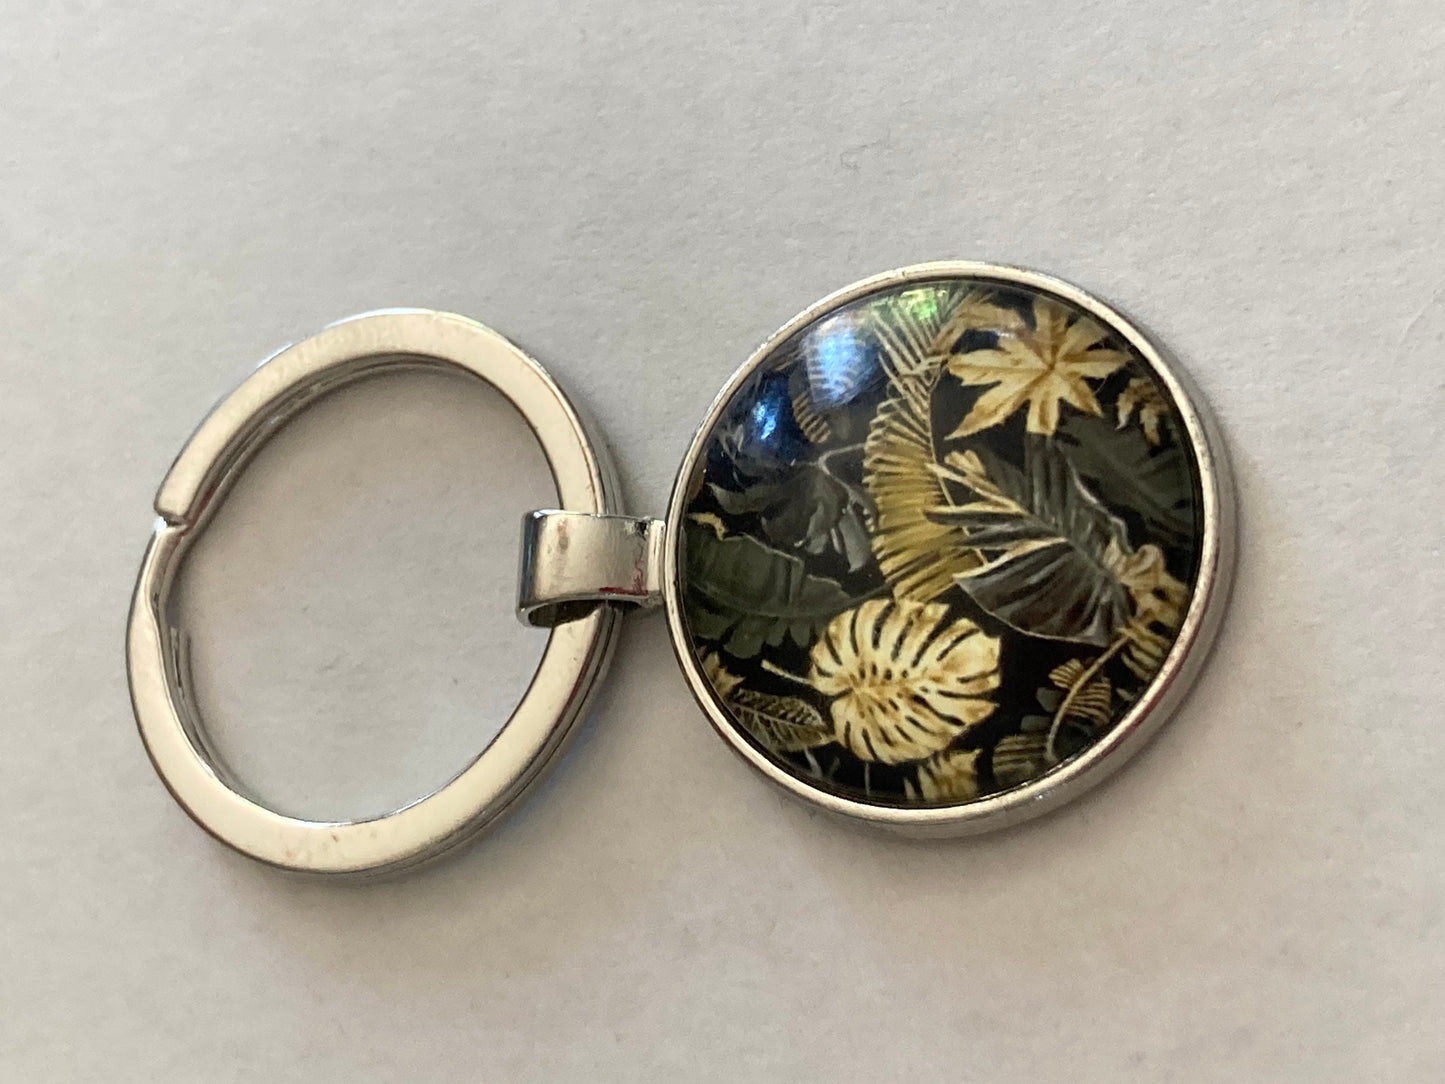 Designer style black and gold palm tree print silver tone keyring with 25mm glass cabochon